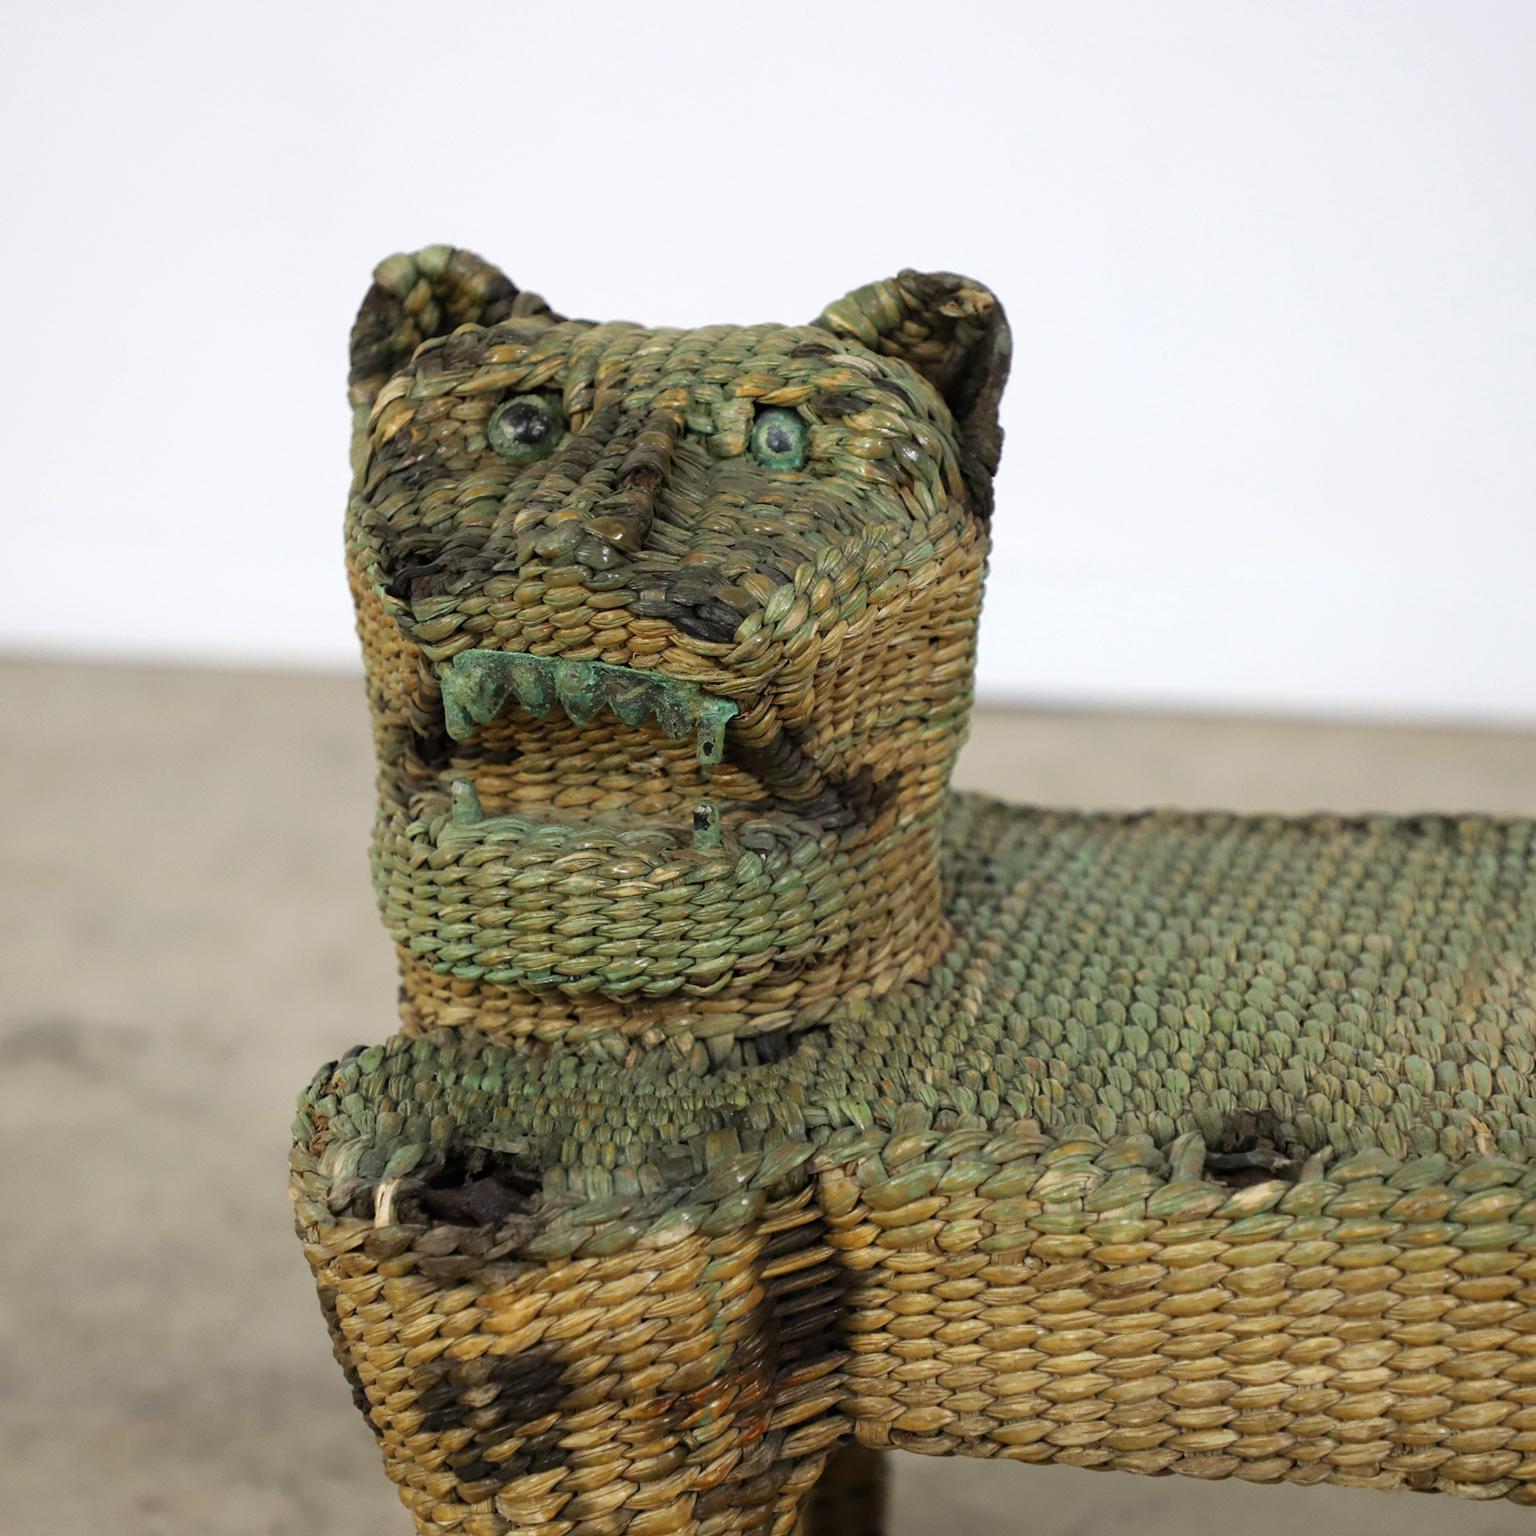 Circa 1970, we offer this Antique Mario Lopez Torres Jaguar Petite Stool, made in natural woven and iron structure, the eyes are made in precious stone.